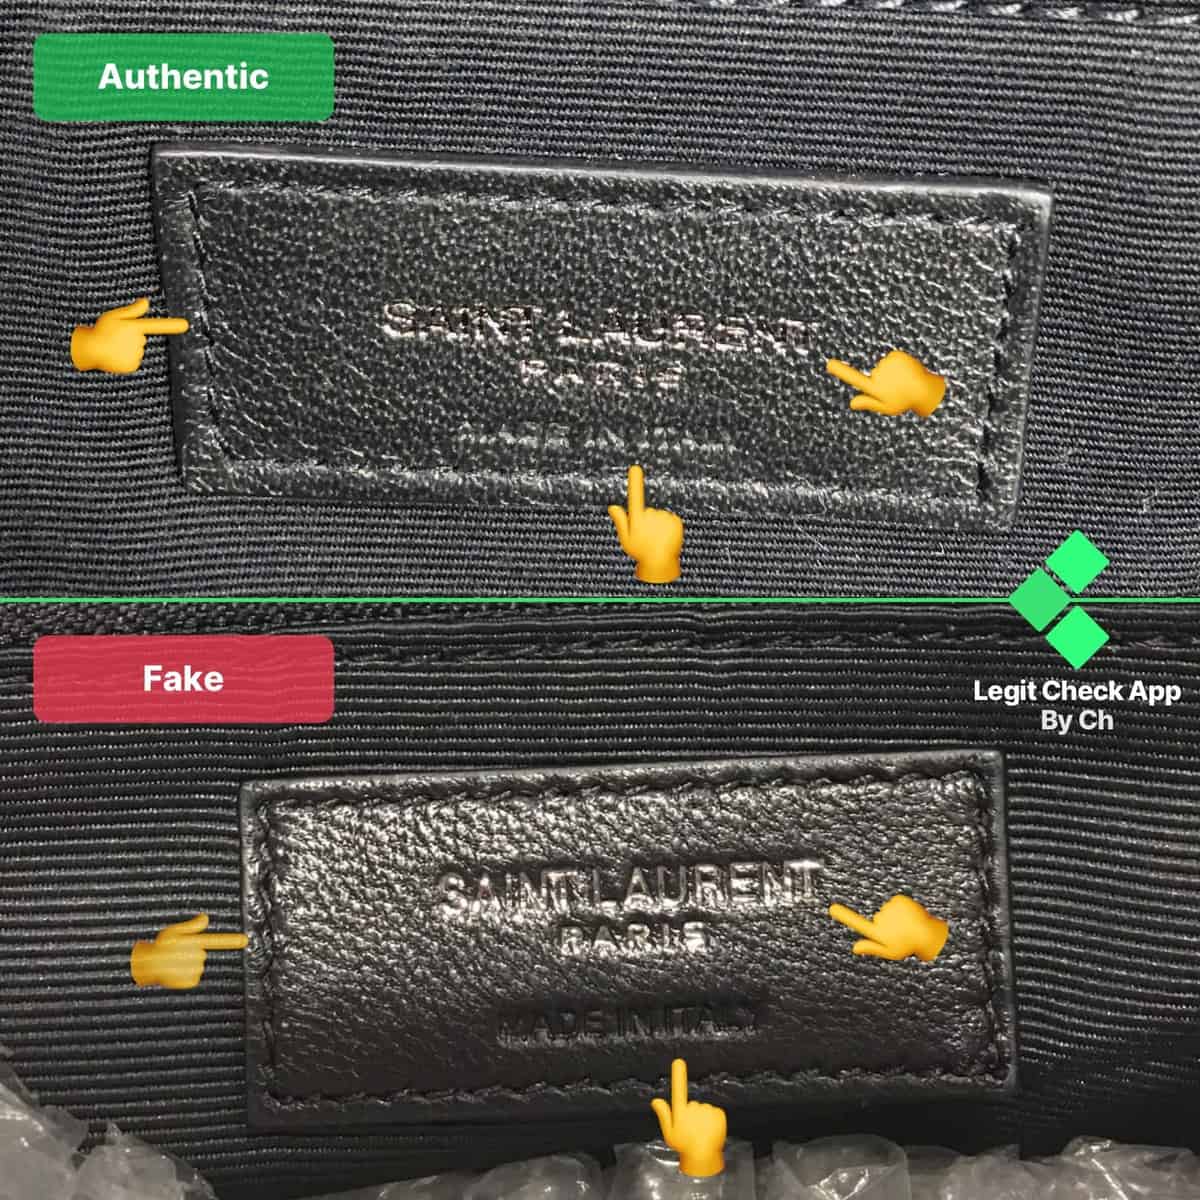 ysl bag authenticity check